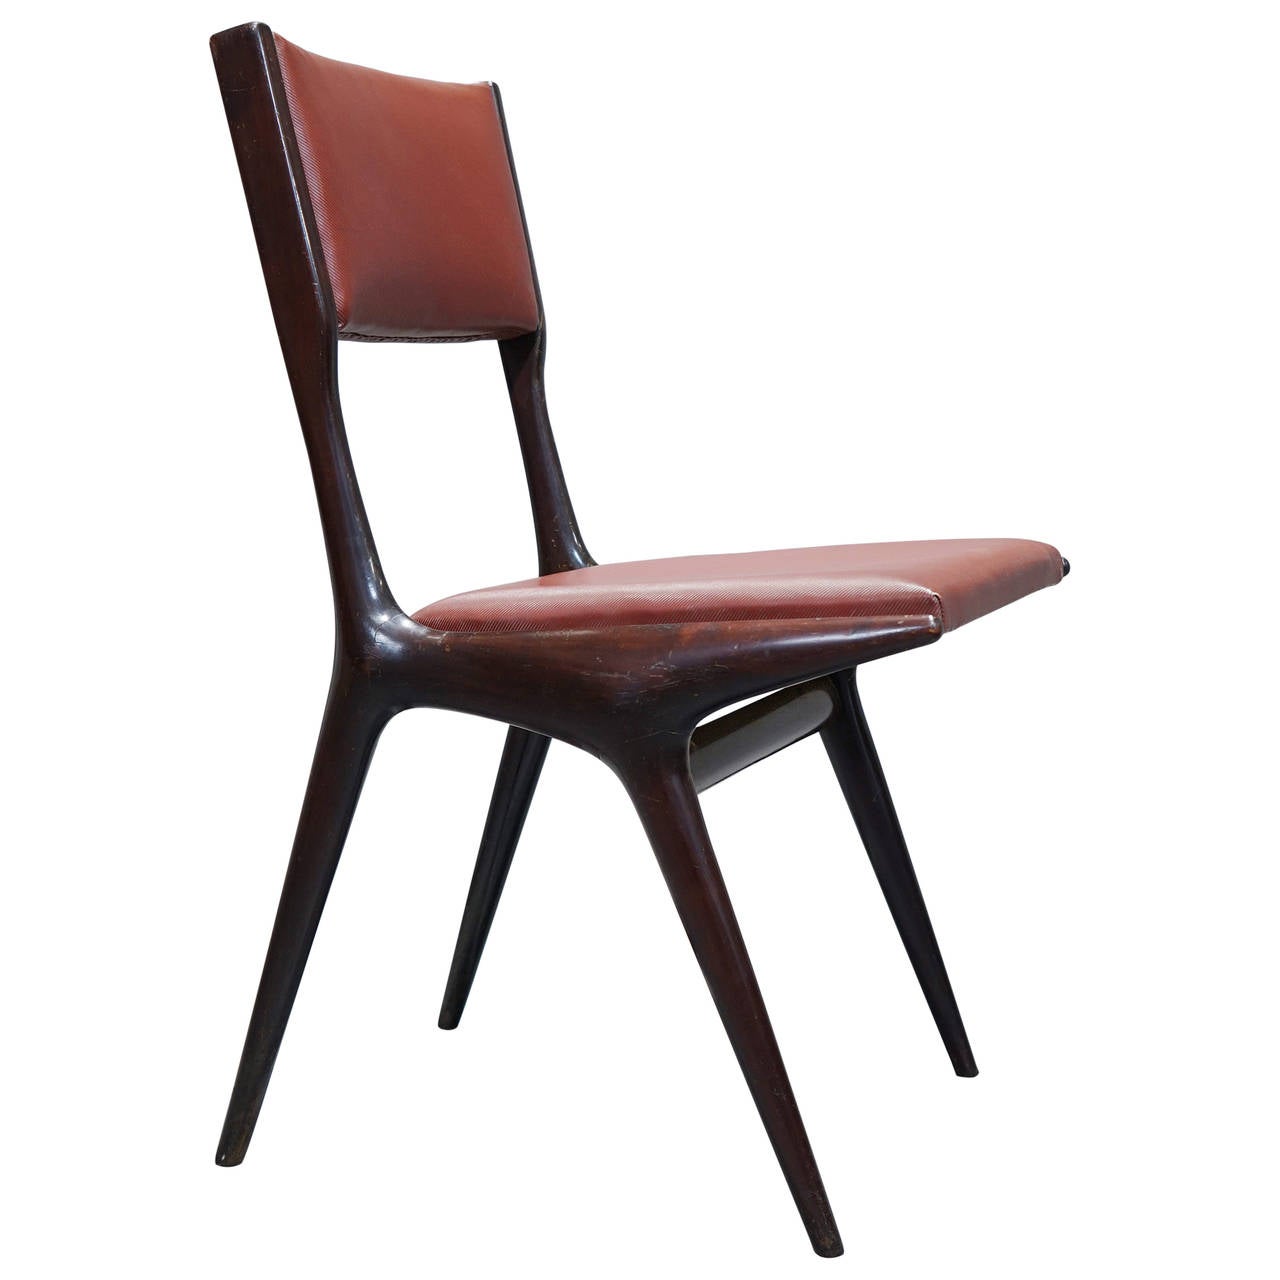 4 Chairs model 634 by Carlo de Carli, Cassina Italy 1954

in 4 different colors, original cover